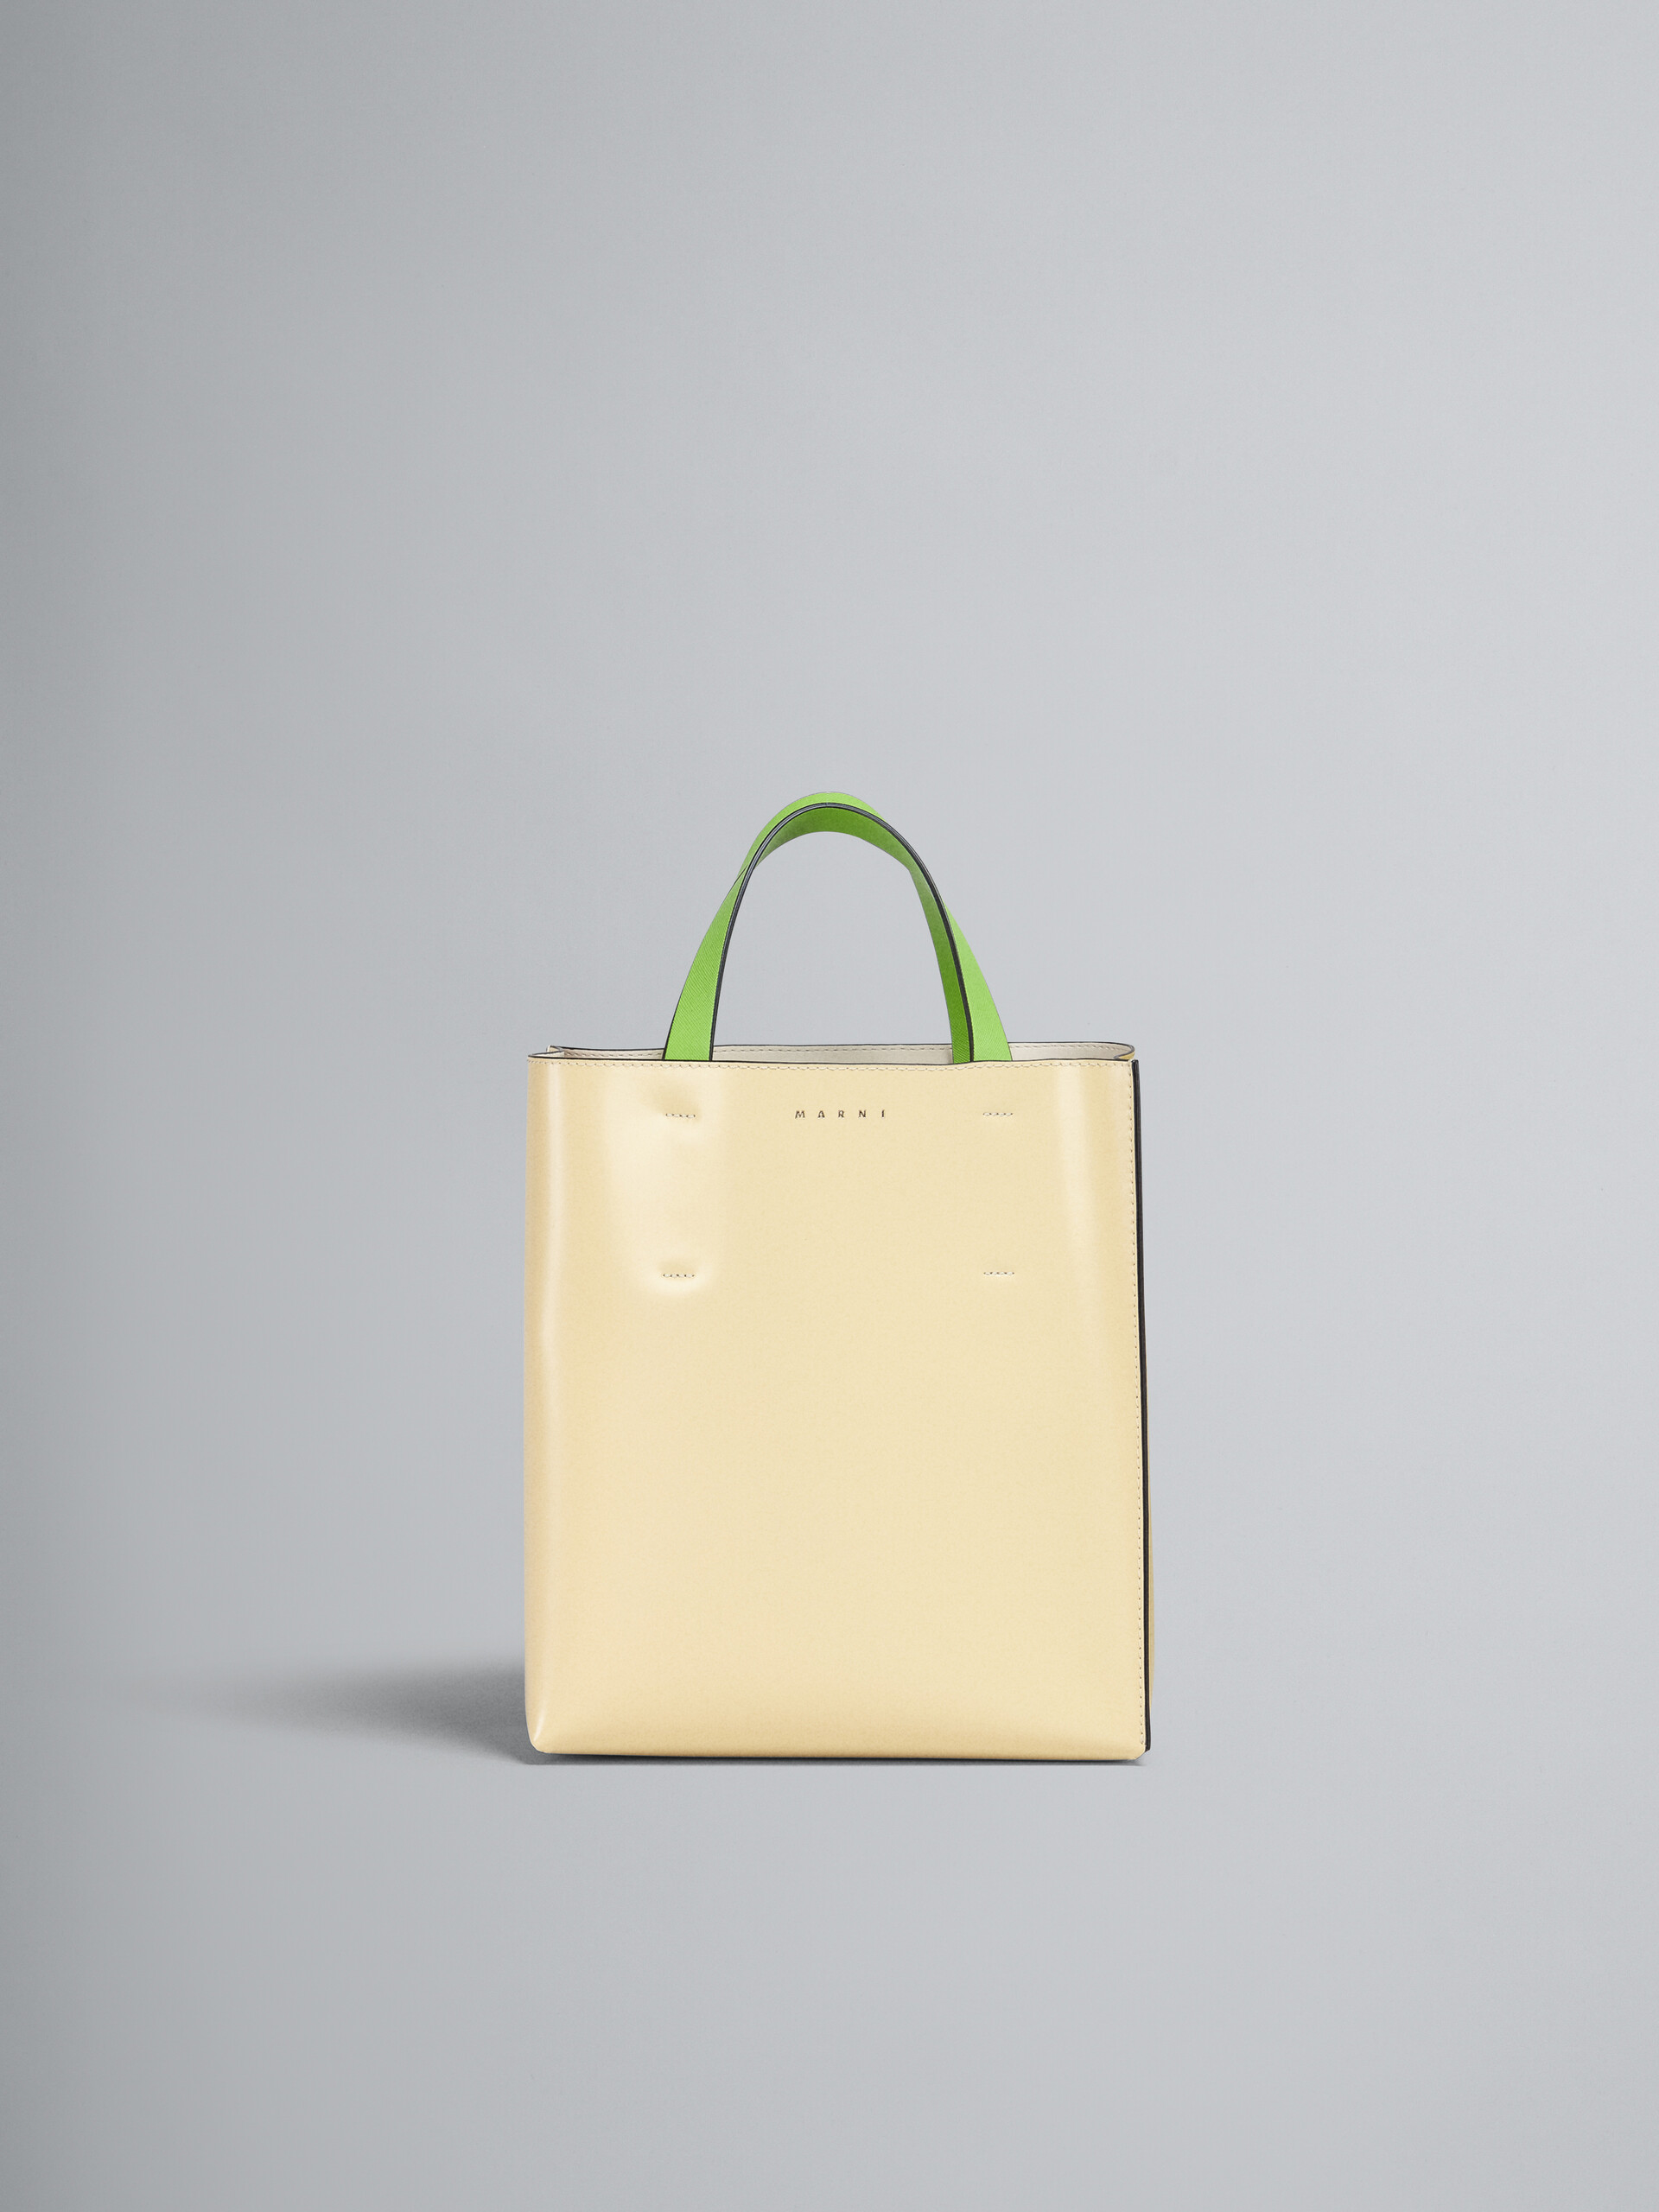 MUSEO small bag in yellow saffiano leather - Shopping Bags - Image 1